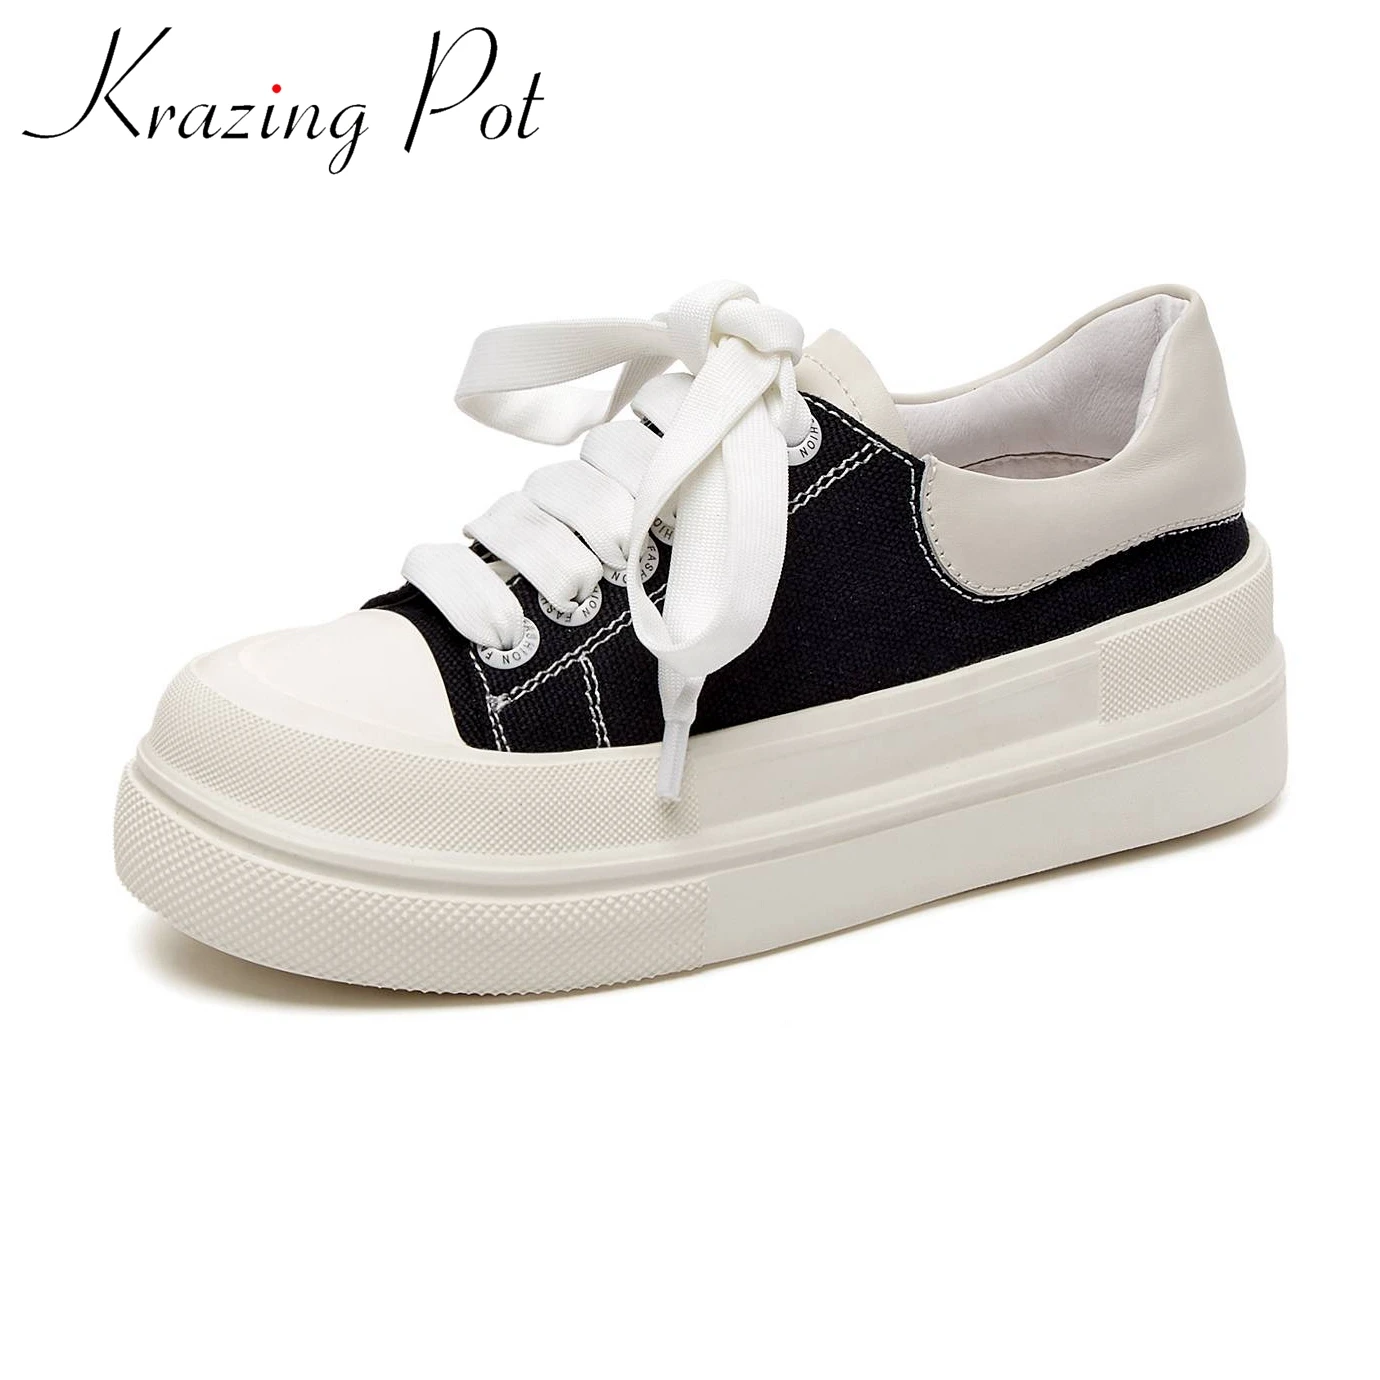 

Krazing pot full grain leather preppy style sneakers lace up cross-tied round toe platform leisure mixed color vulcanized shoes